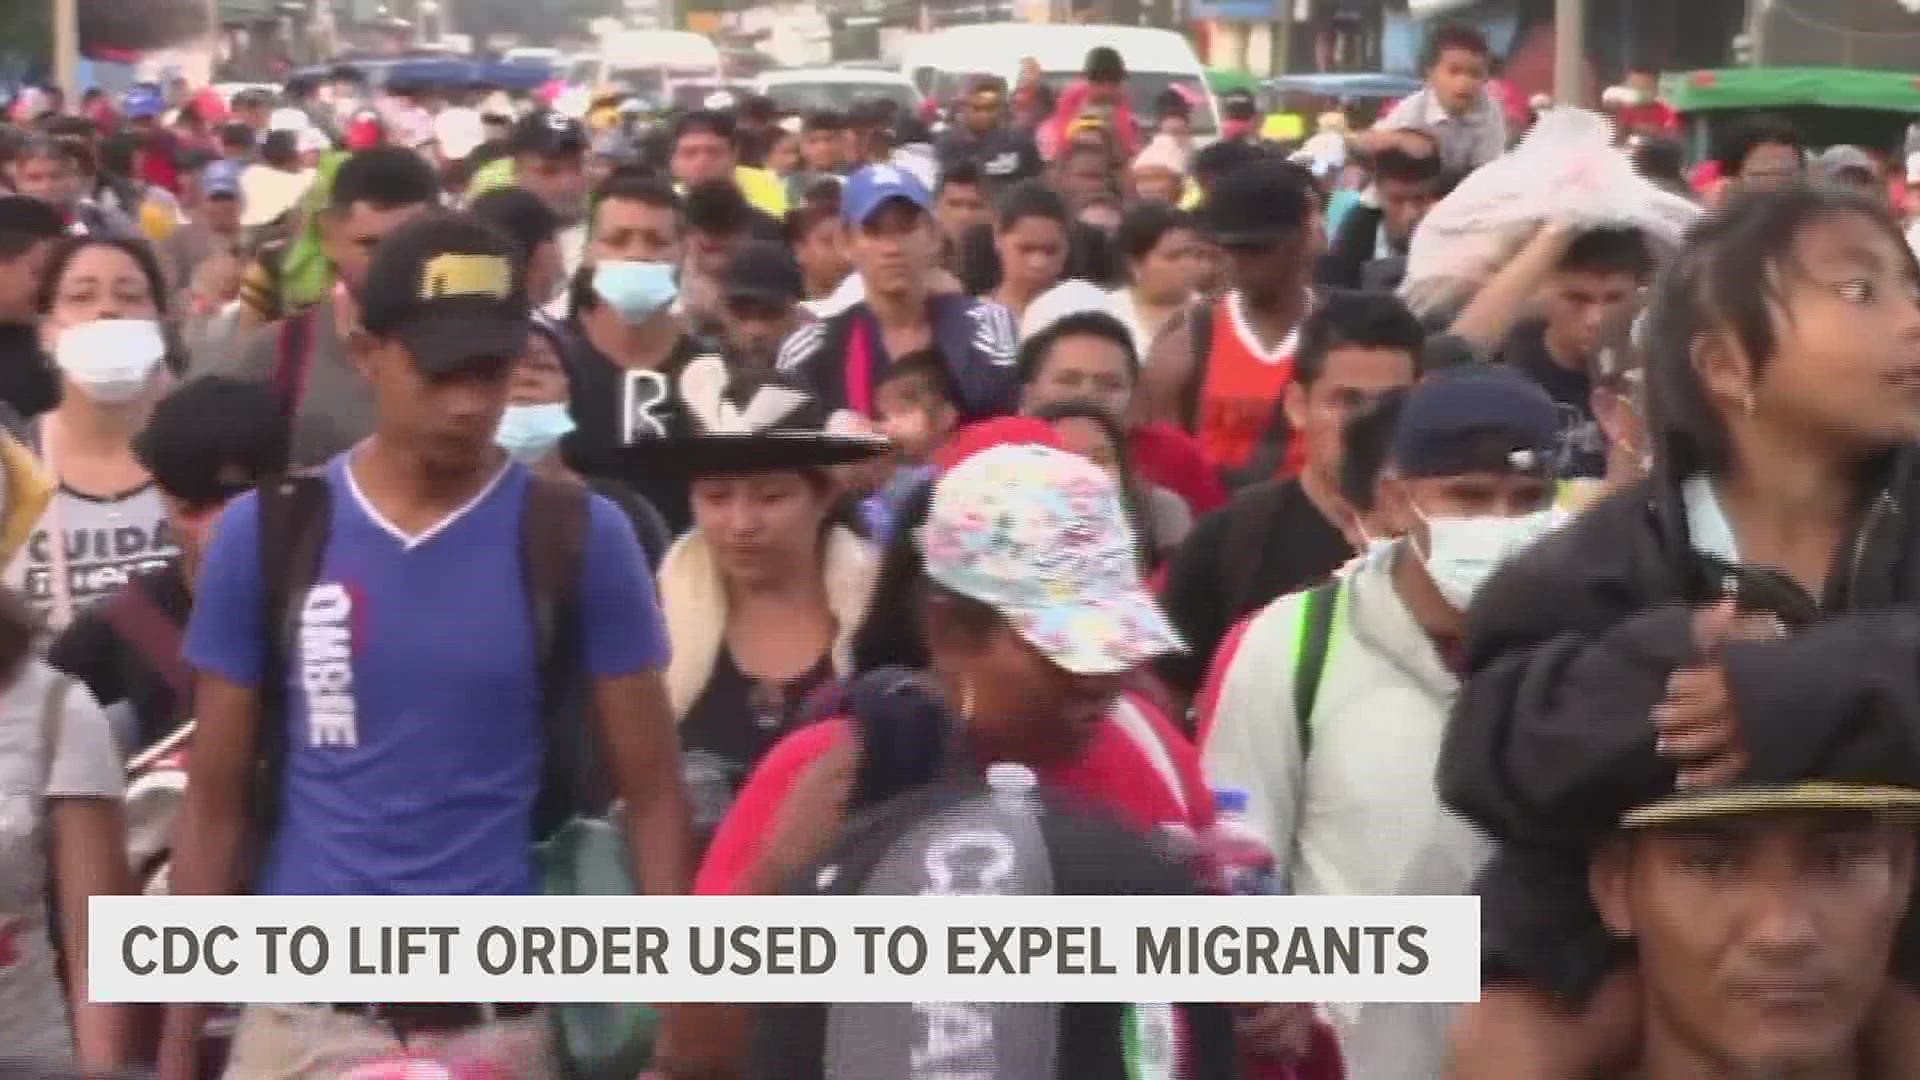 Since the policy went into effect in March 2020, migrants trying to enter the U.S. have been turned away more than 1.7 million times.